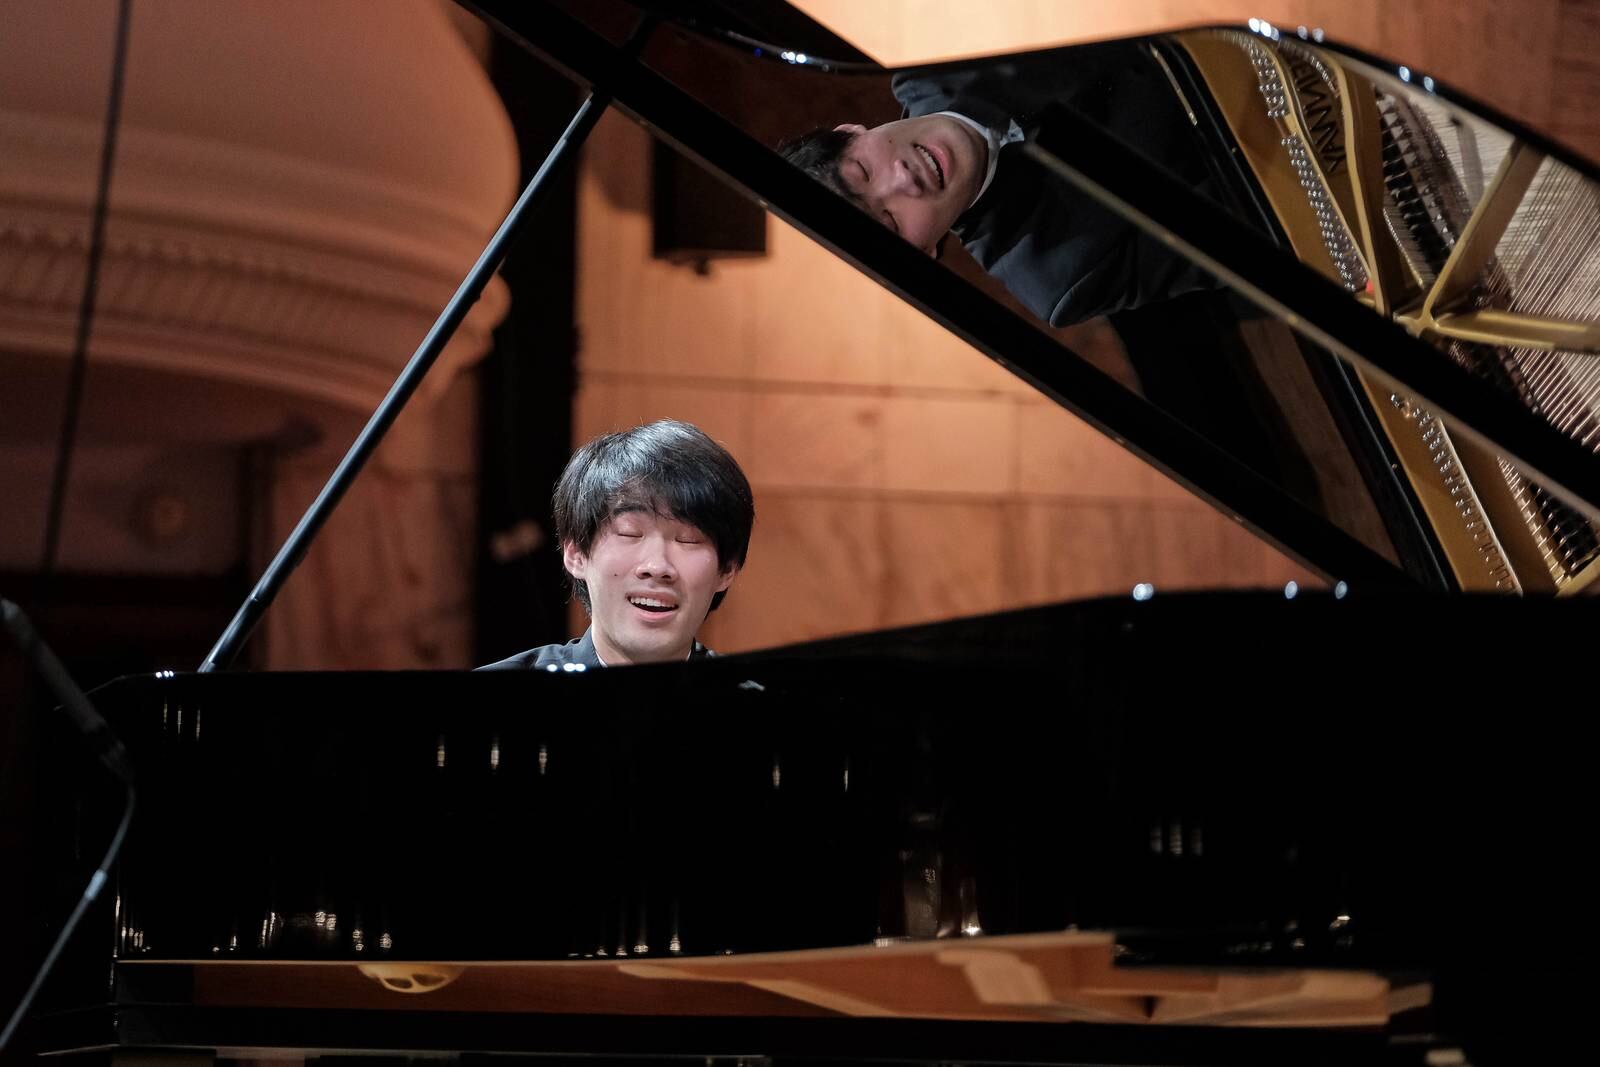 Pianist Bruce Liu on how his life changed after winning the Chopin